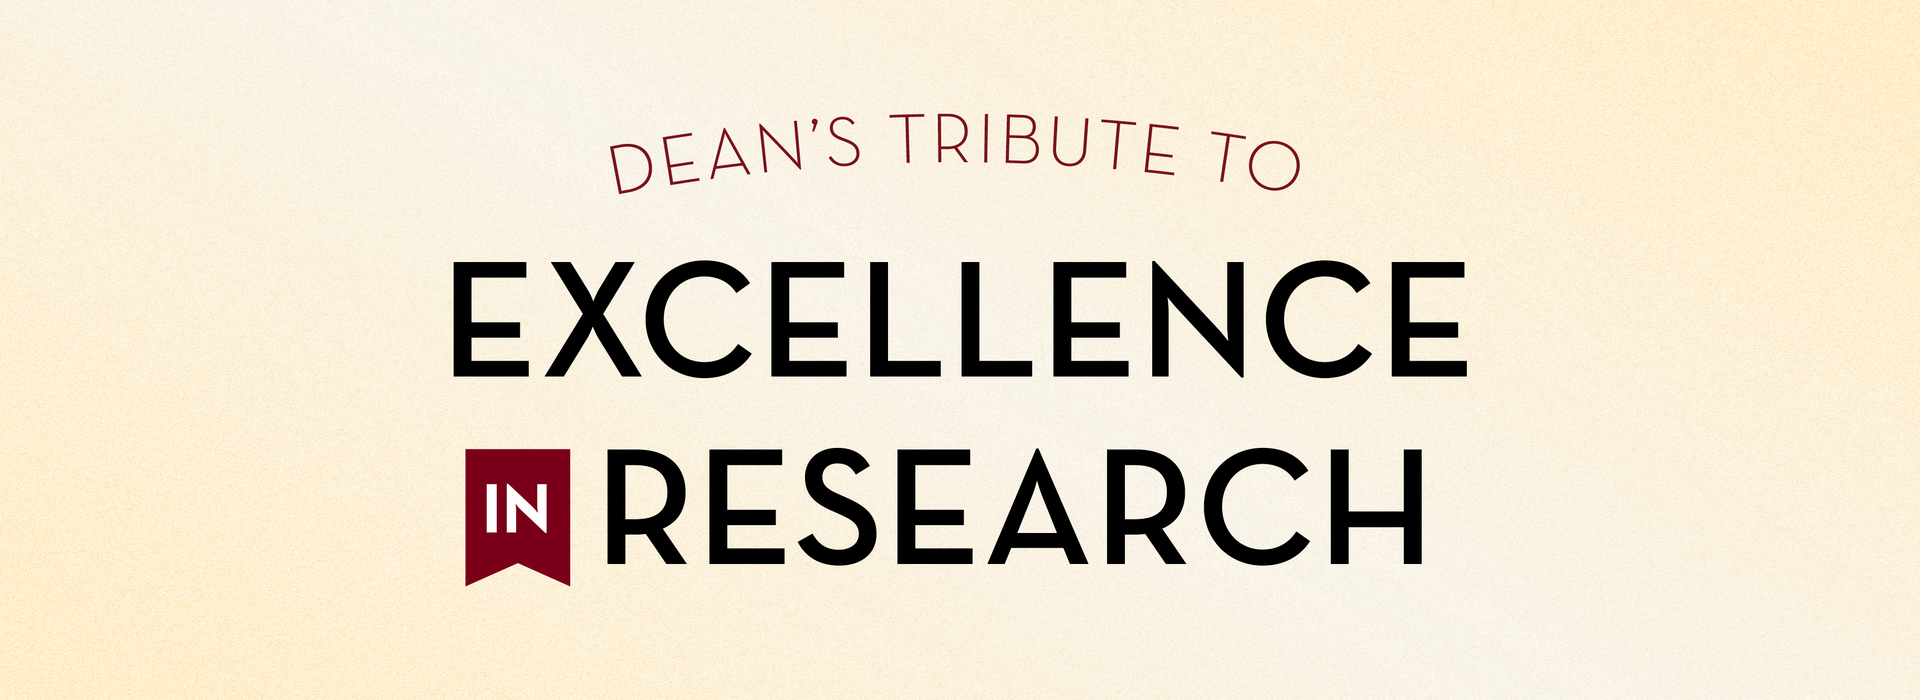 Dean's Tribute to Excellence in Research